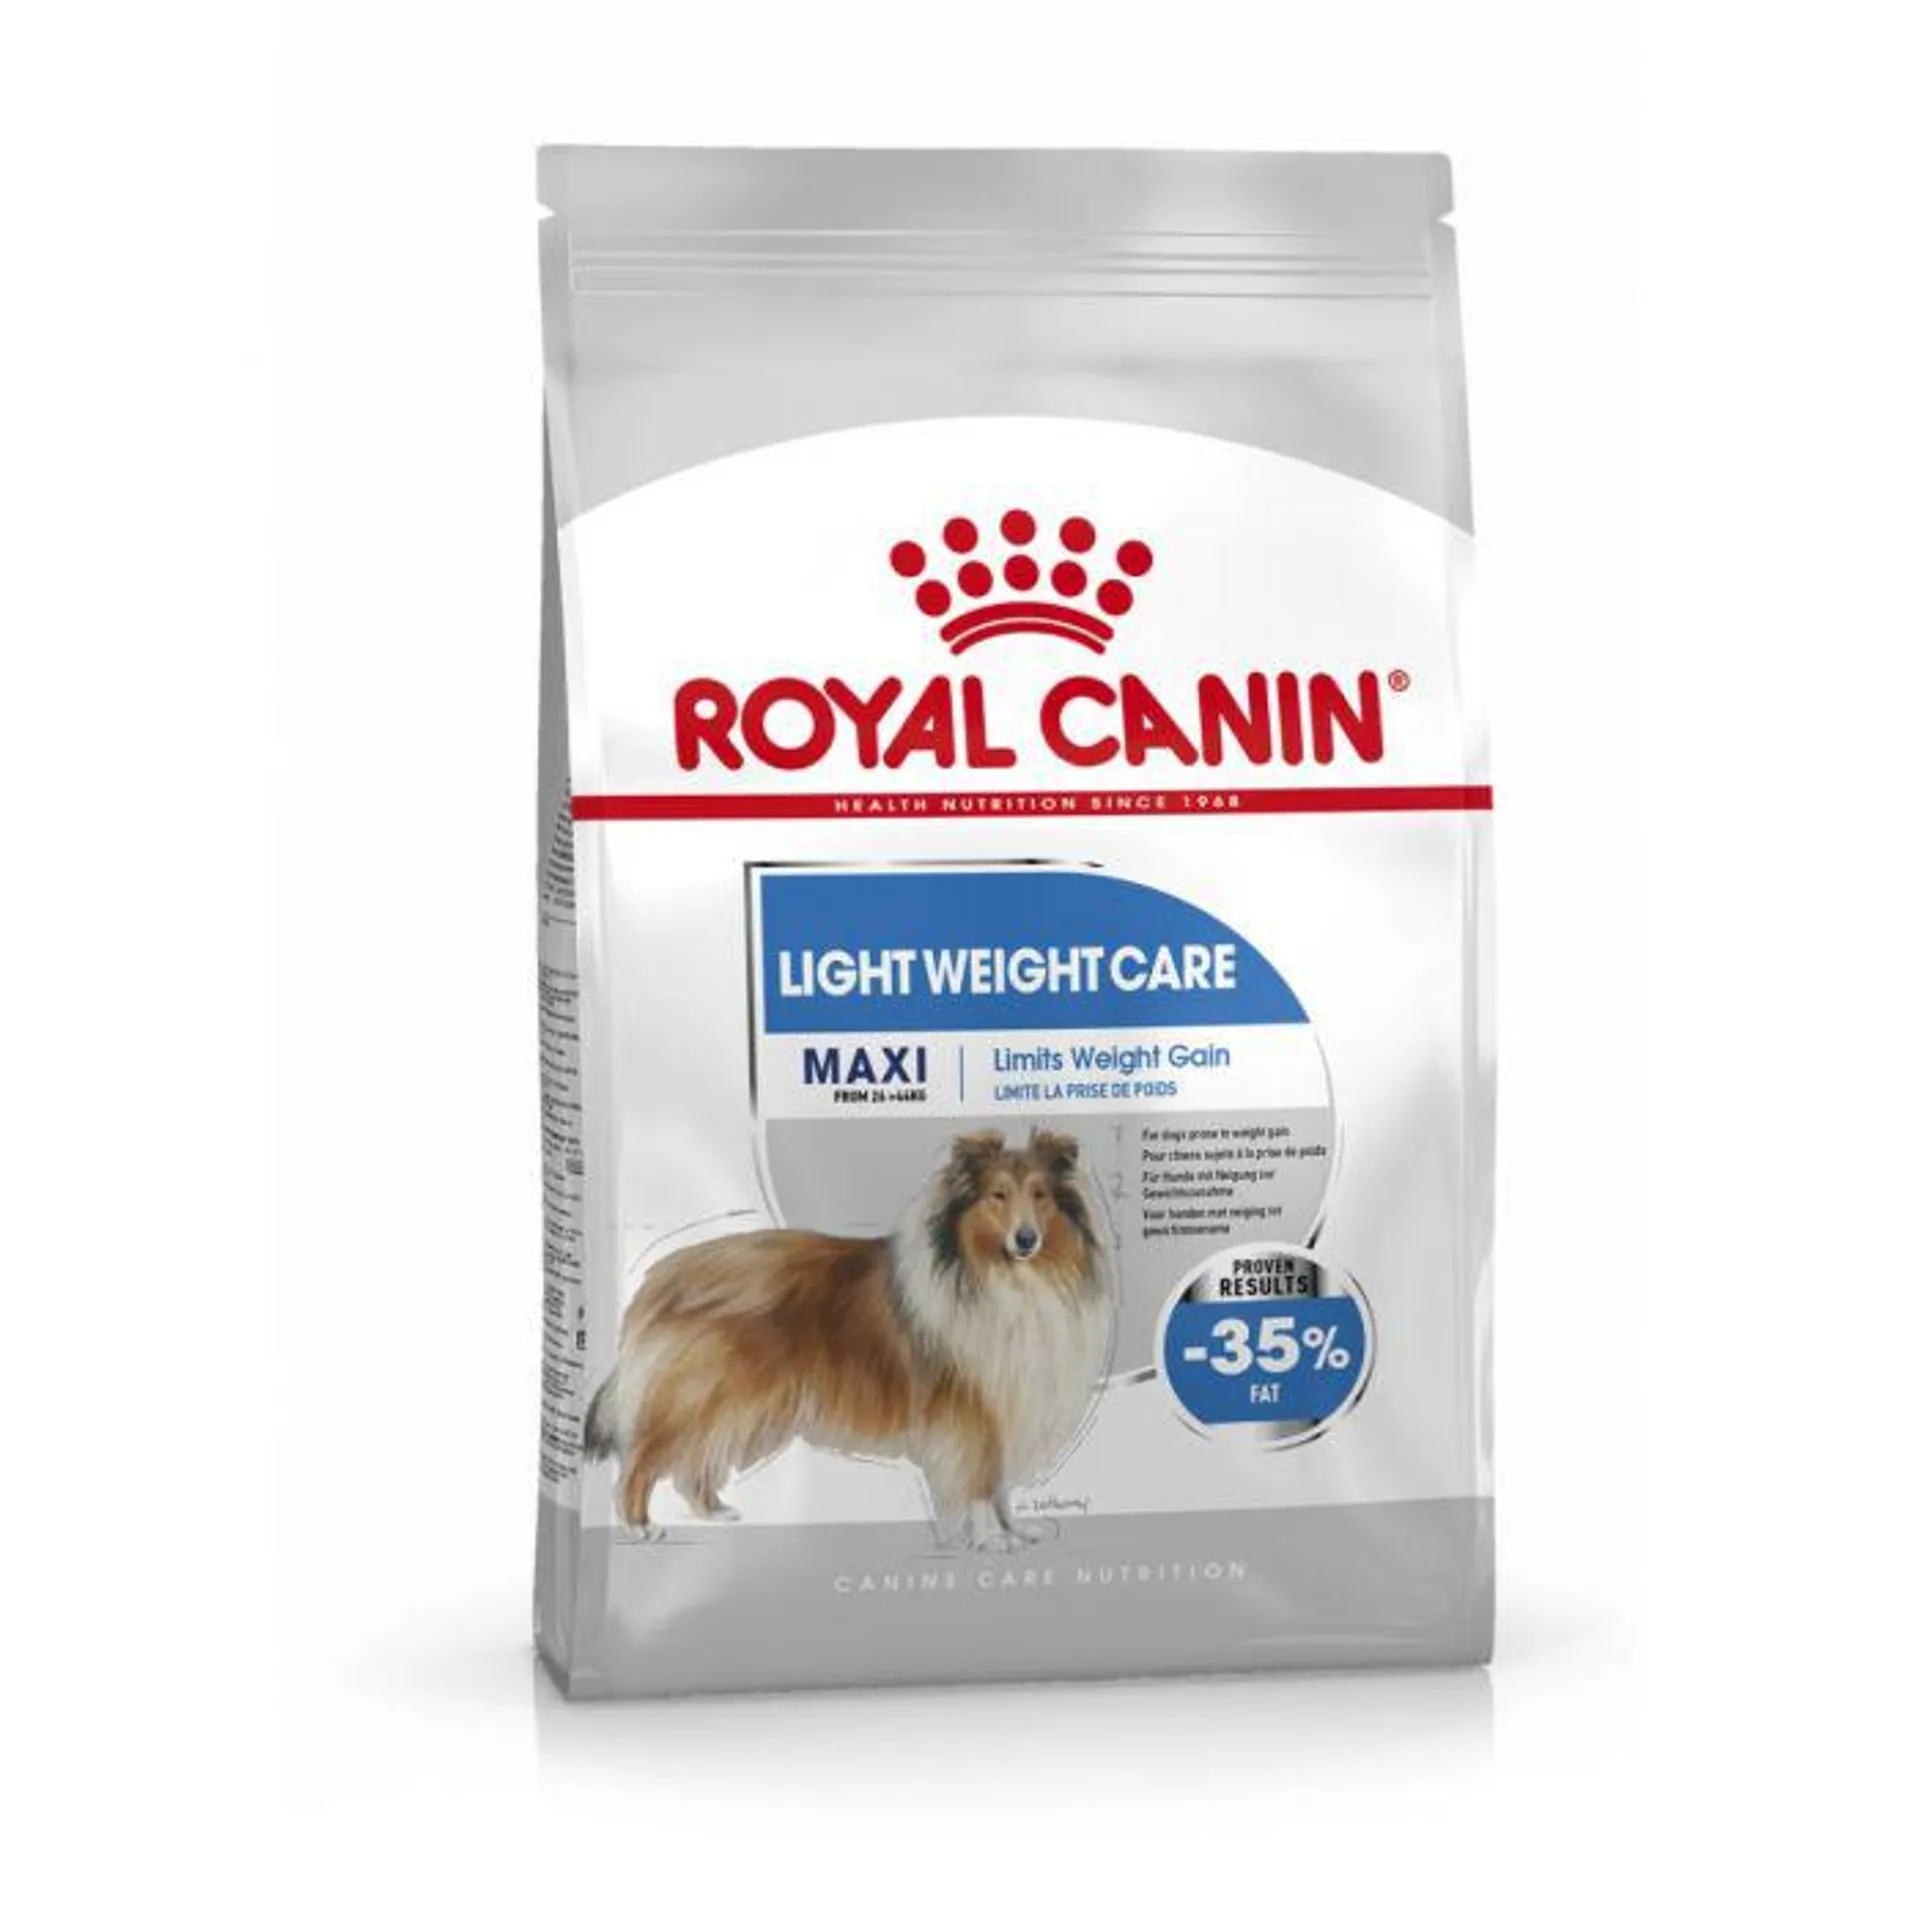 Royal Canin Maxi Light Weight Care Adult Dry Dog Food - 3kg